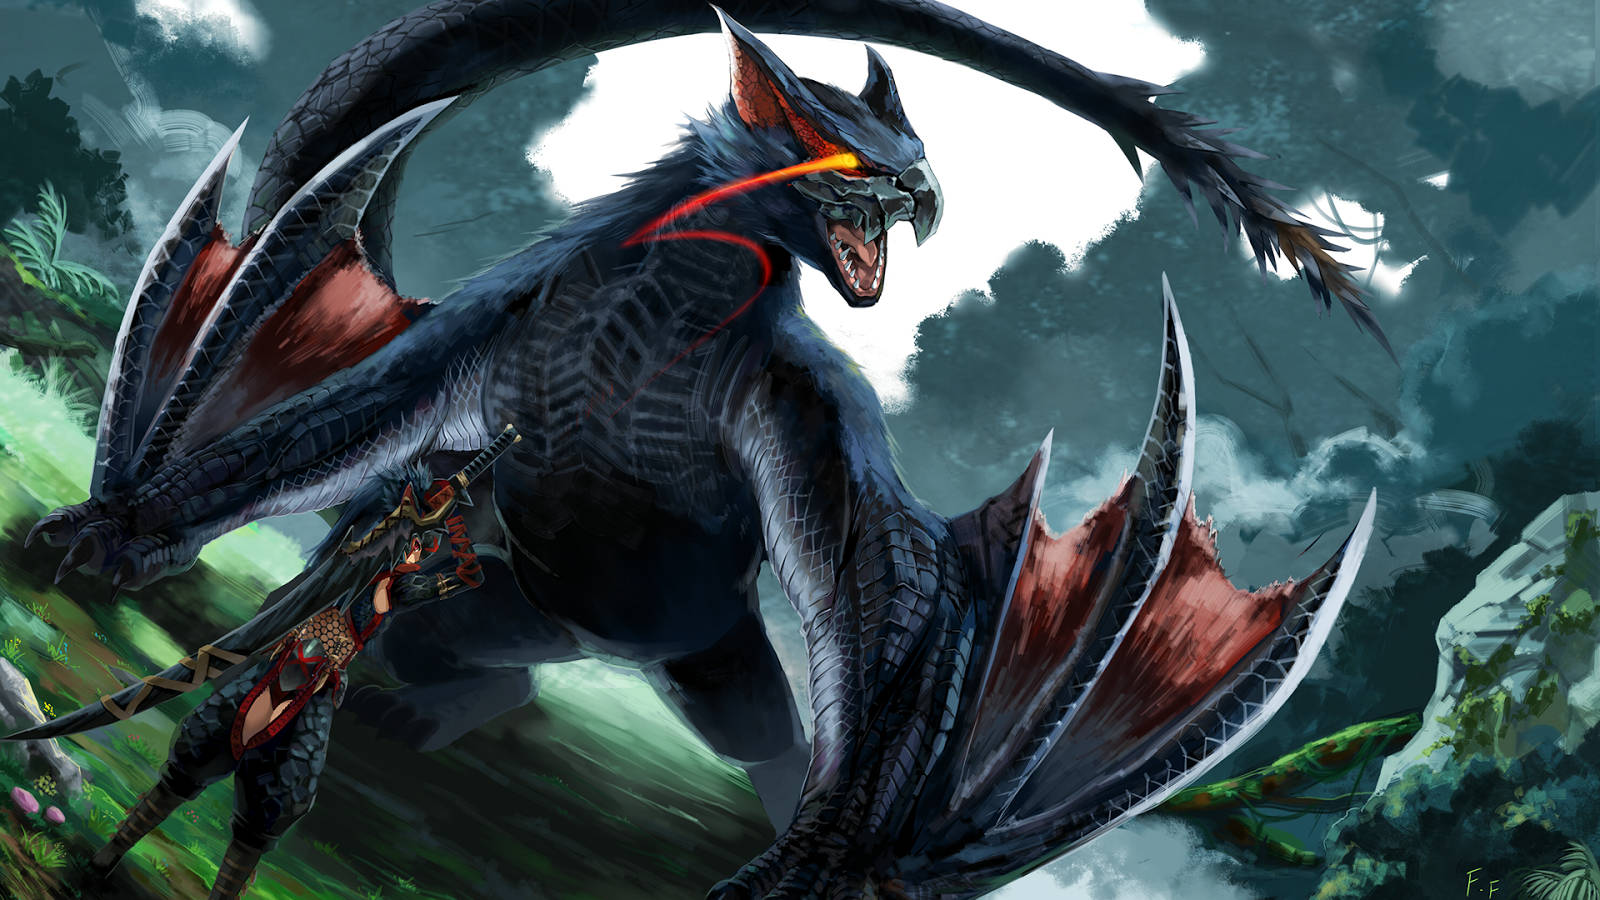 Gaze upon the great Fatalis in the forests of Monster Hunter. Wallpaper